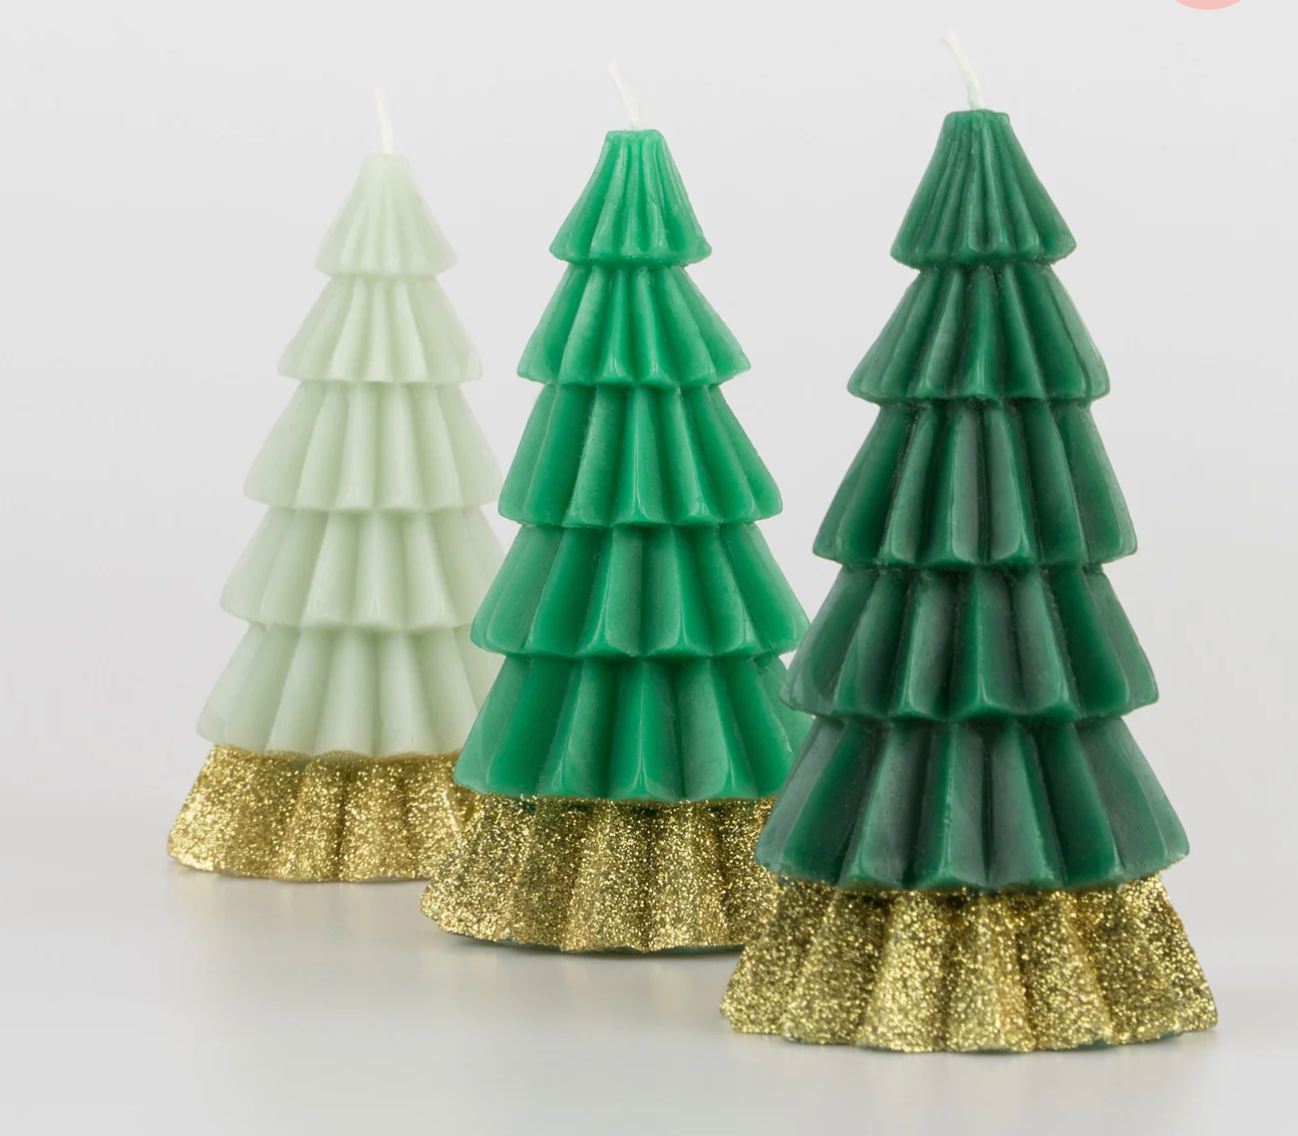 Green Tree Candles (x 3)